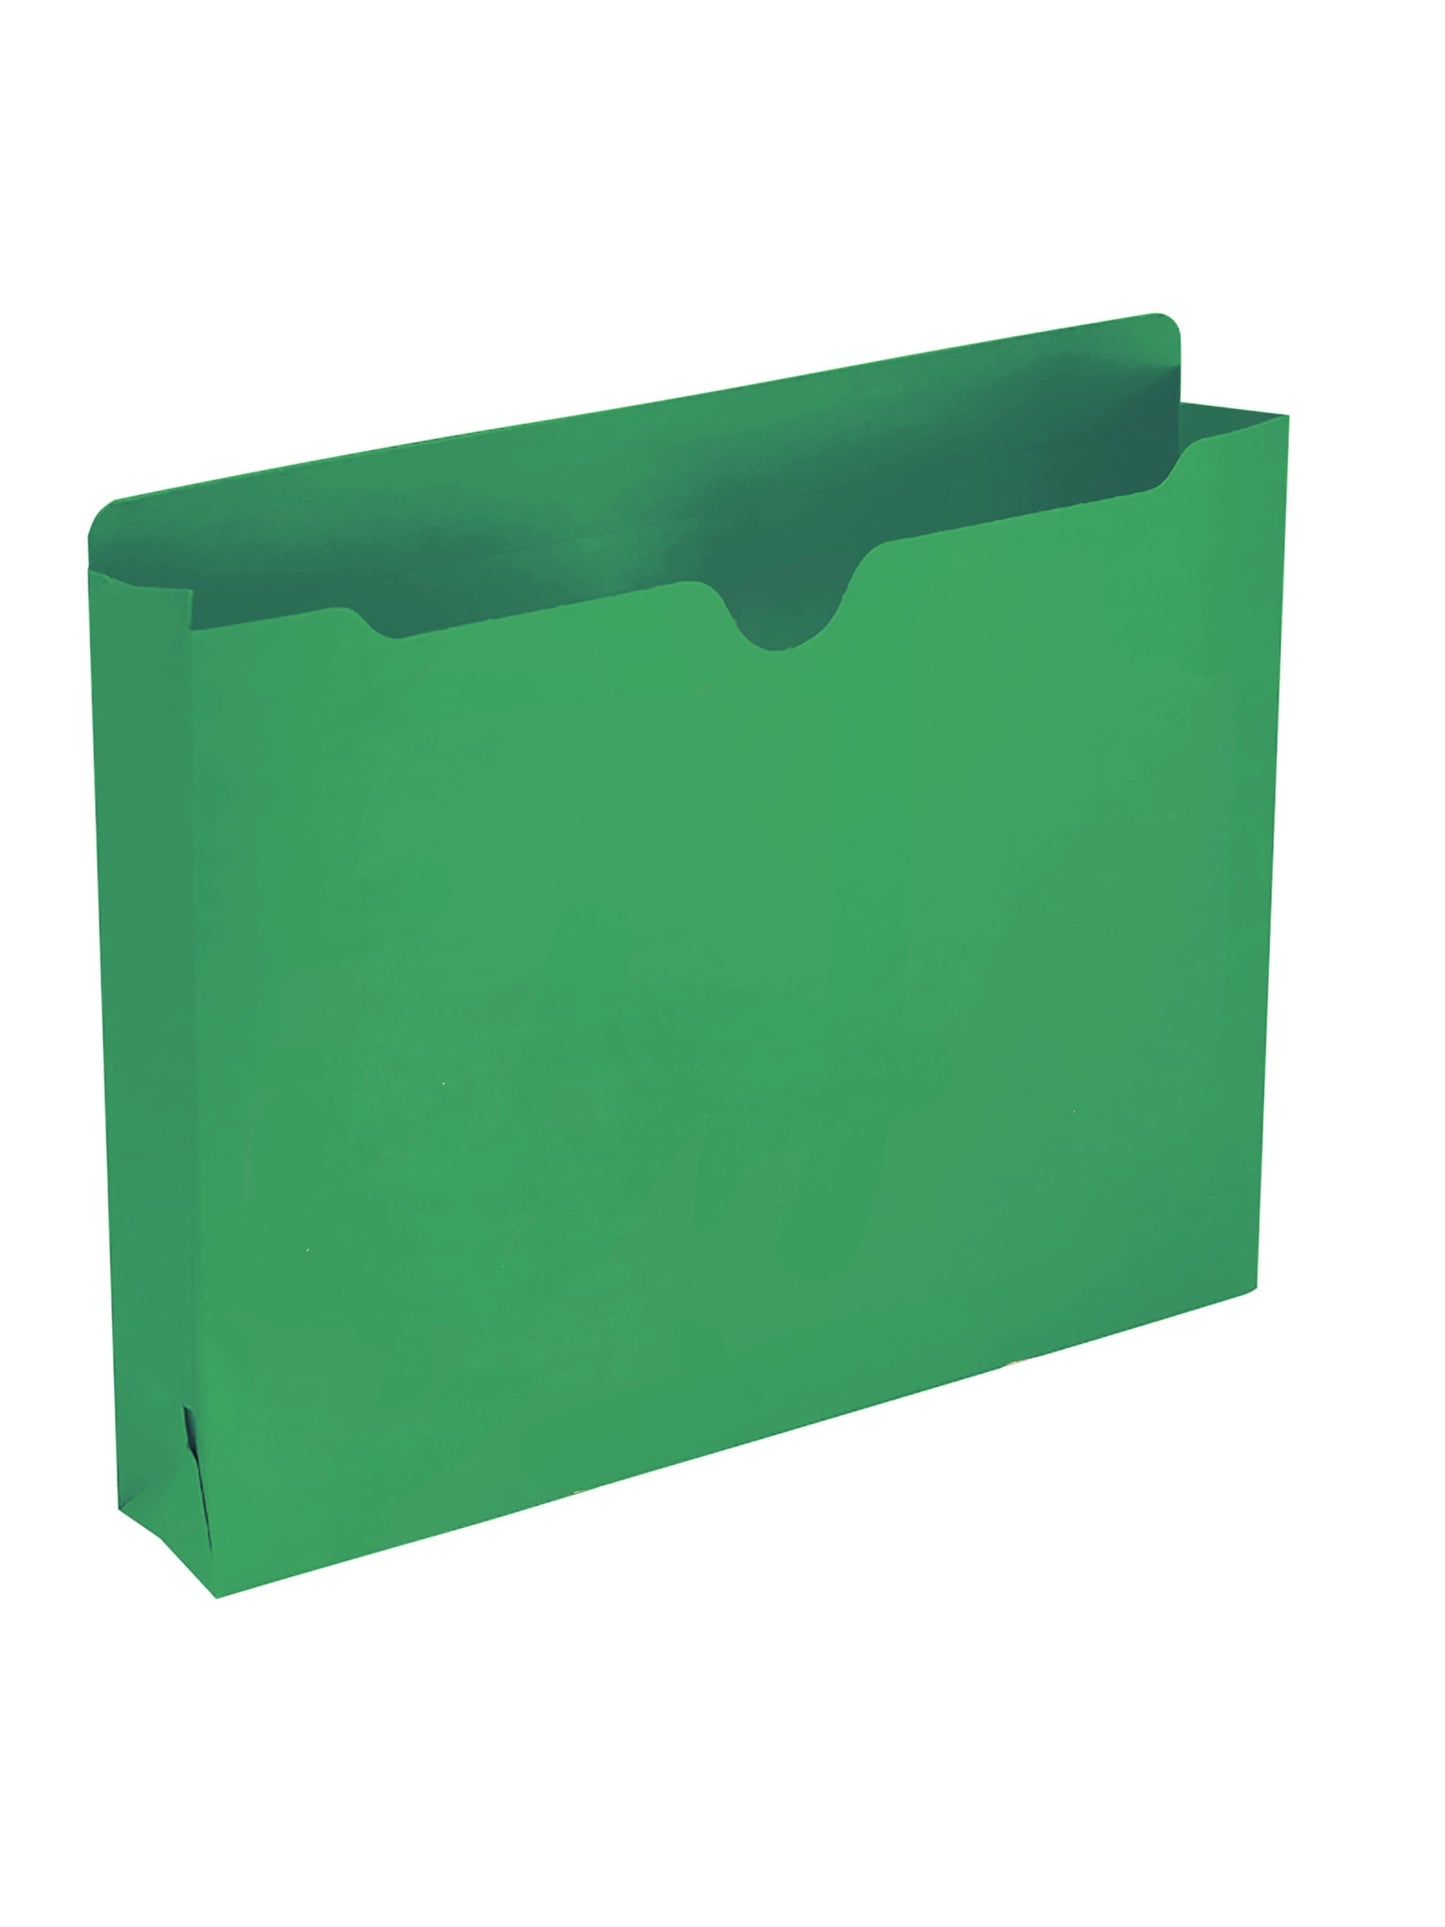 Colored File Jackets, Reinforced Straight-Cut Tab, 2 inch Expansion, Green Color, Letter Size, Set of 0, 30086486755635